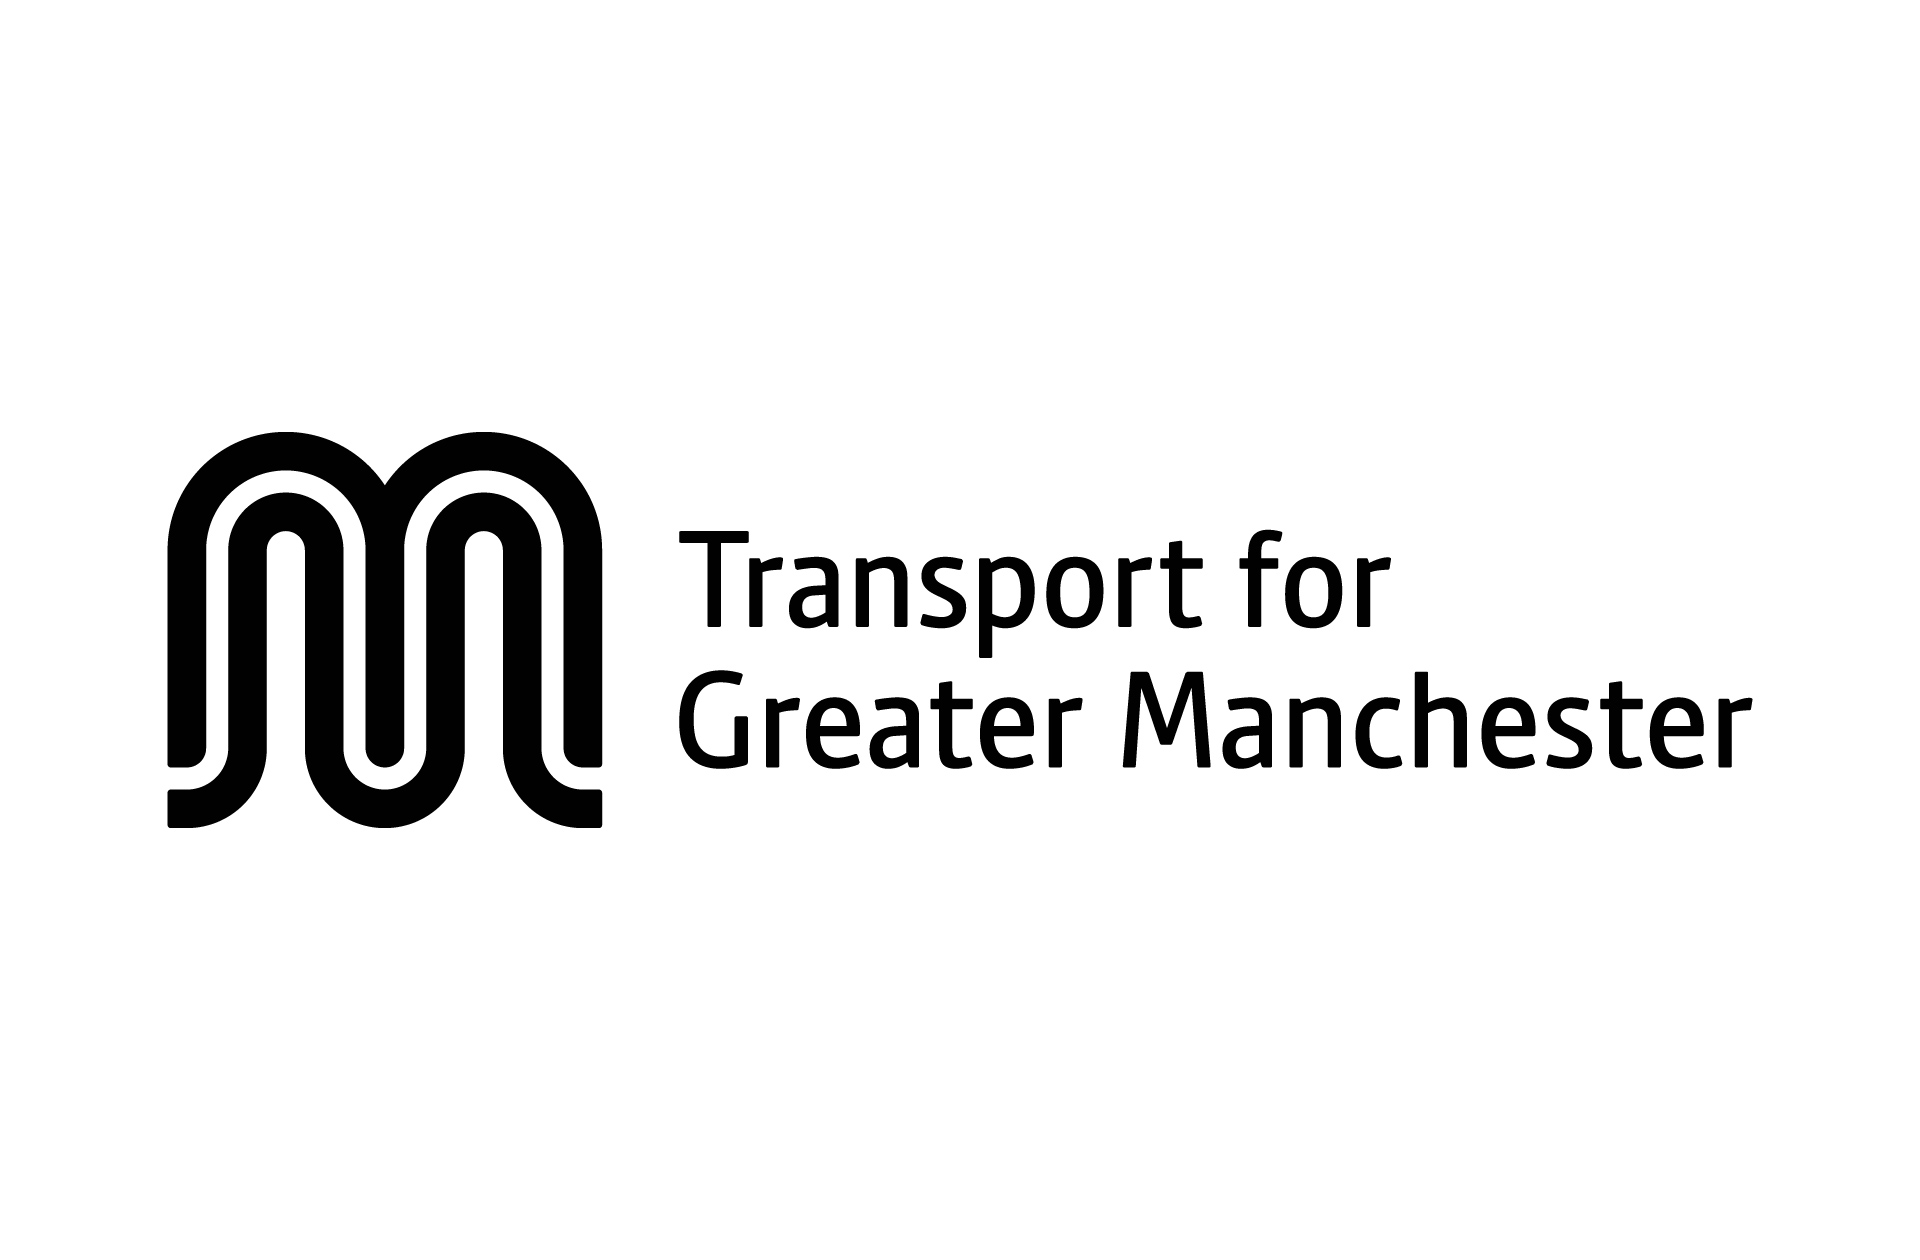 Delivery of specialist support for TfGM